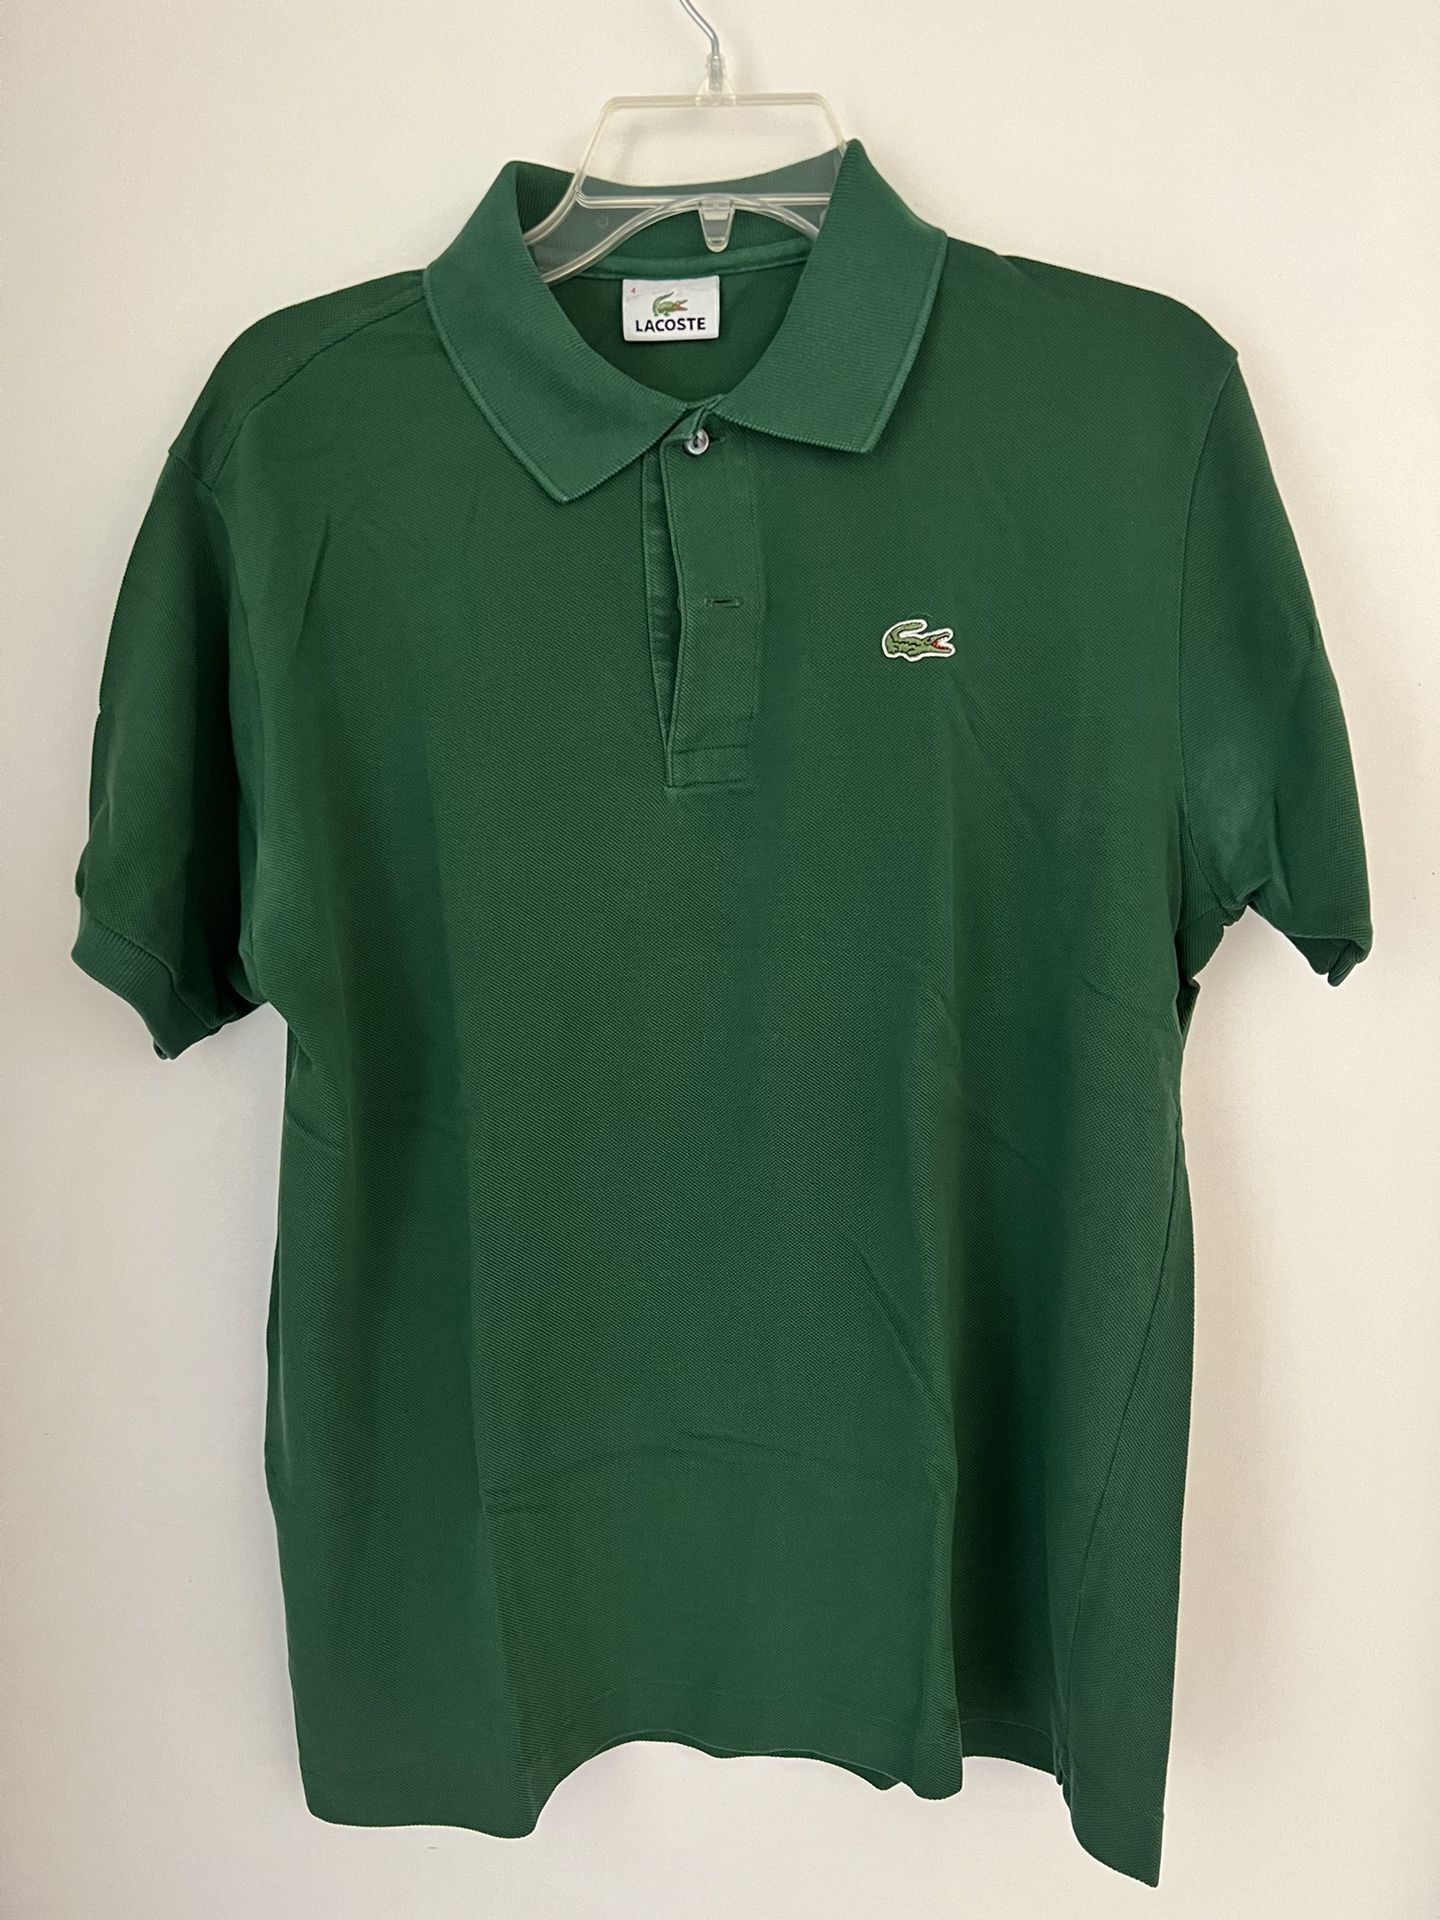 Ellers fordøje radium Lacoste Polo (size: 4 (M), color: Green) for Sale in Dana Point, CA -  OfferUp